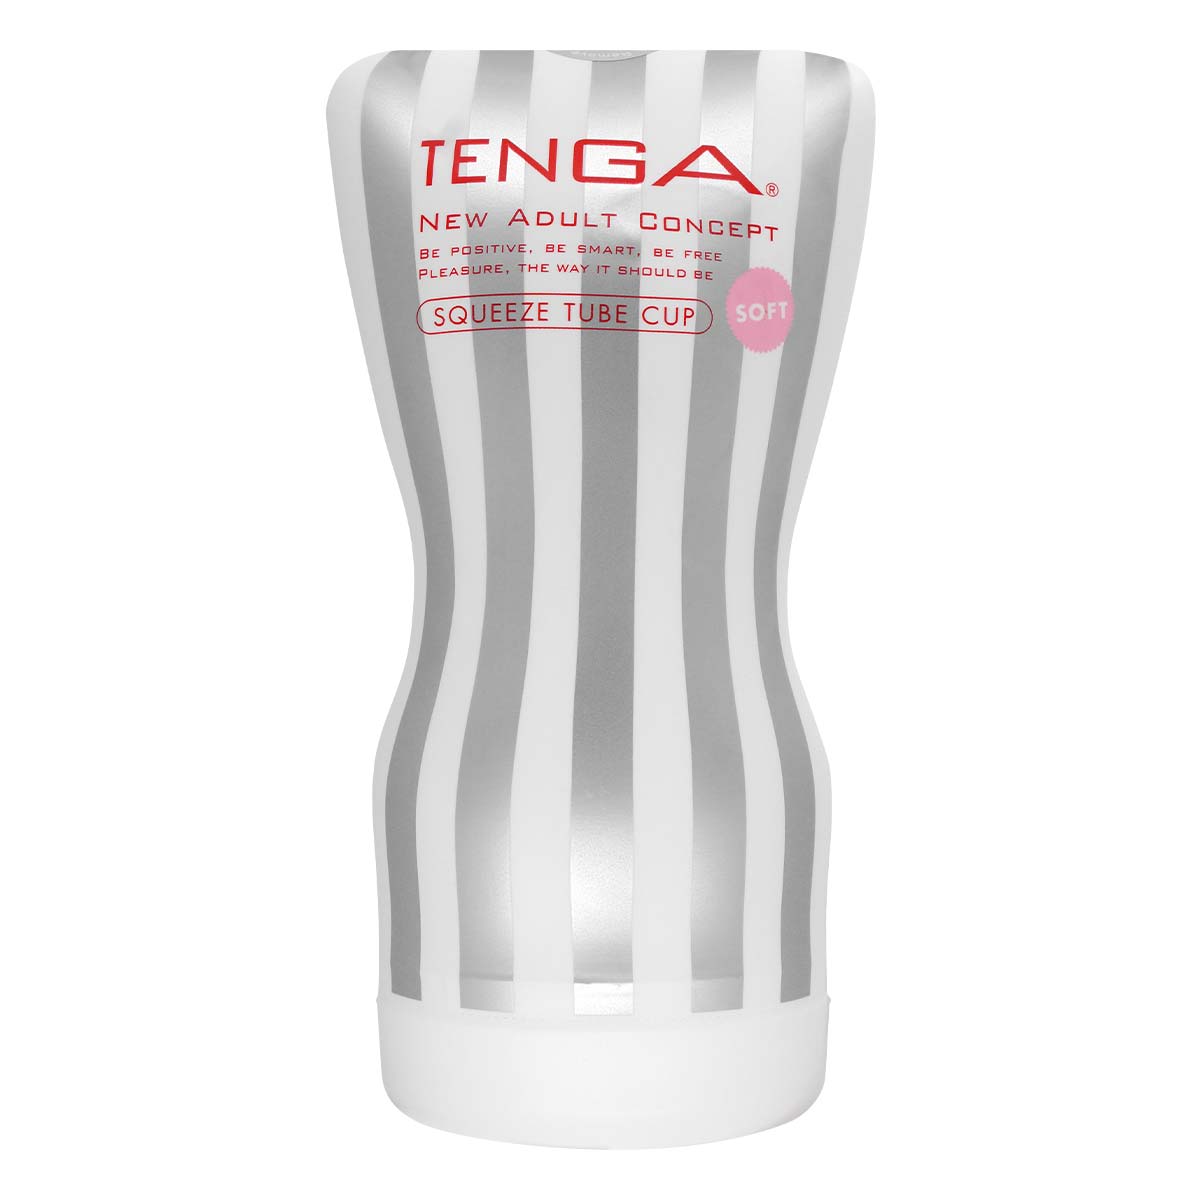 TENGA SQUEEZE TUBE CUP 第二代 柔軟型